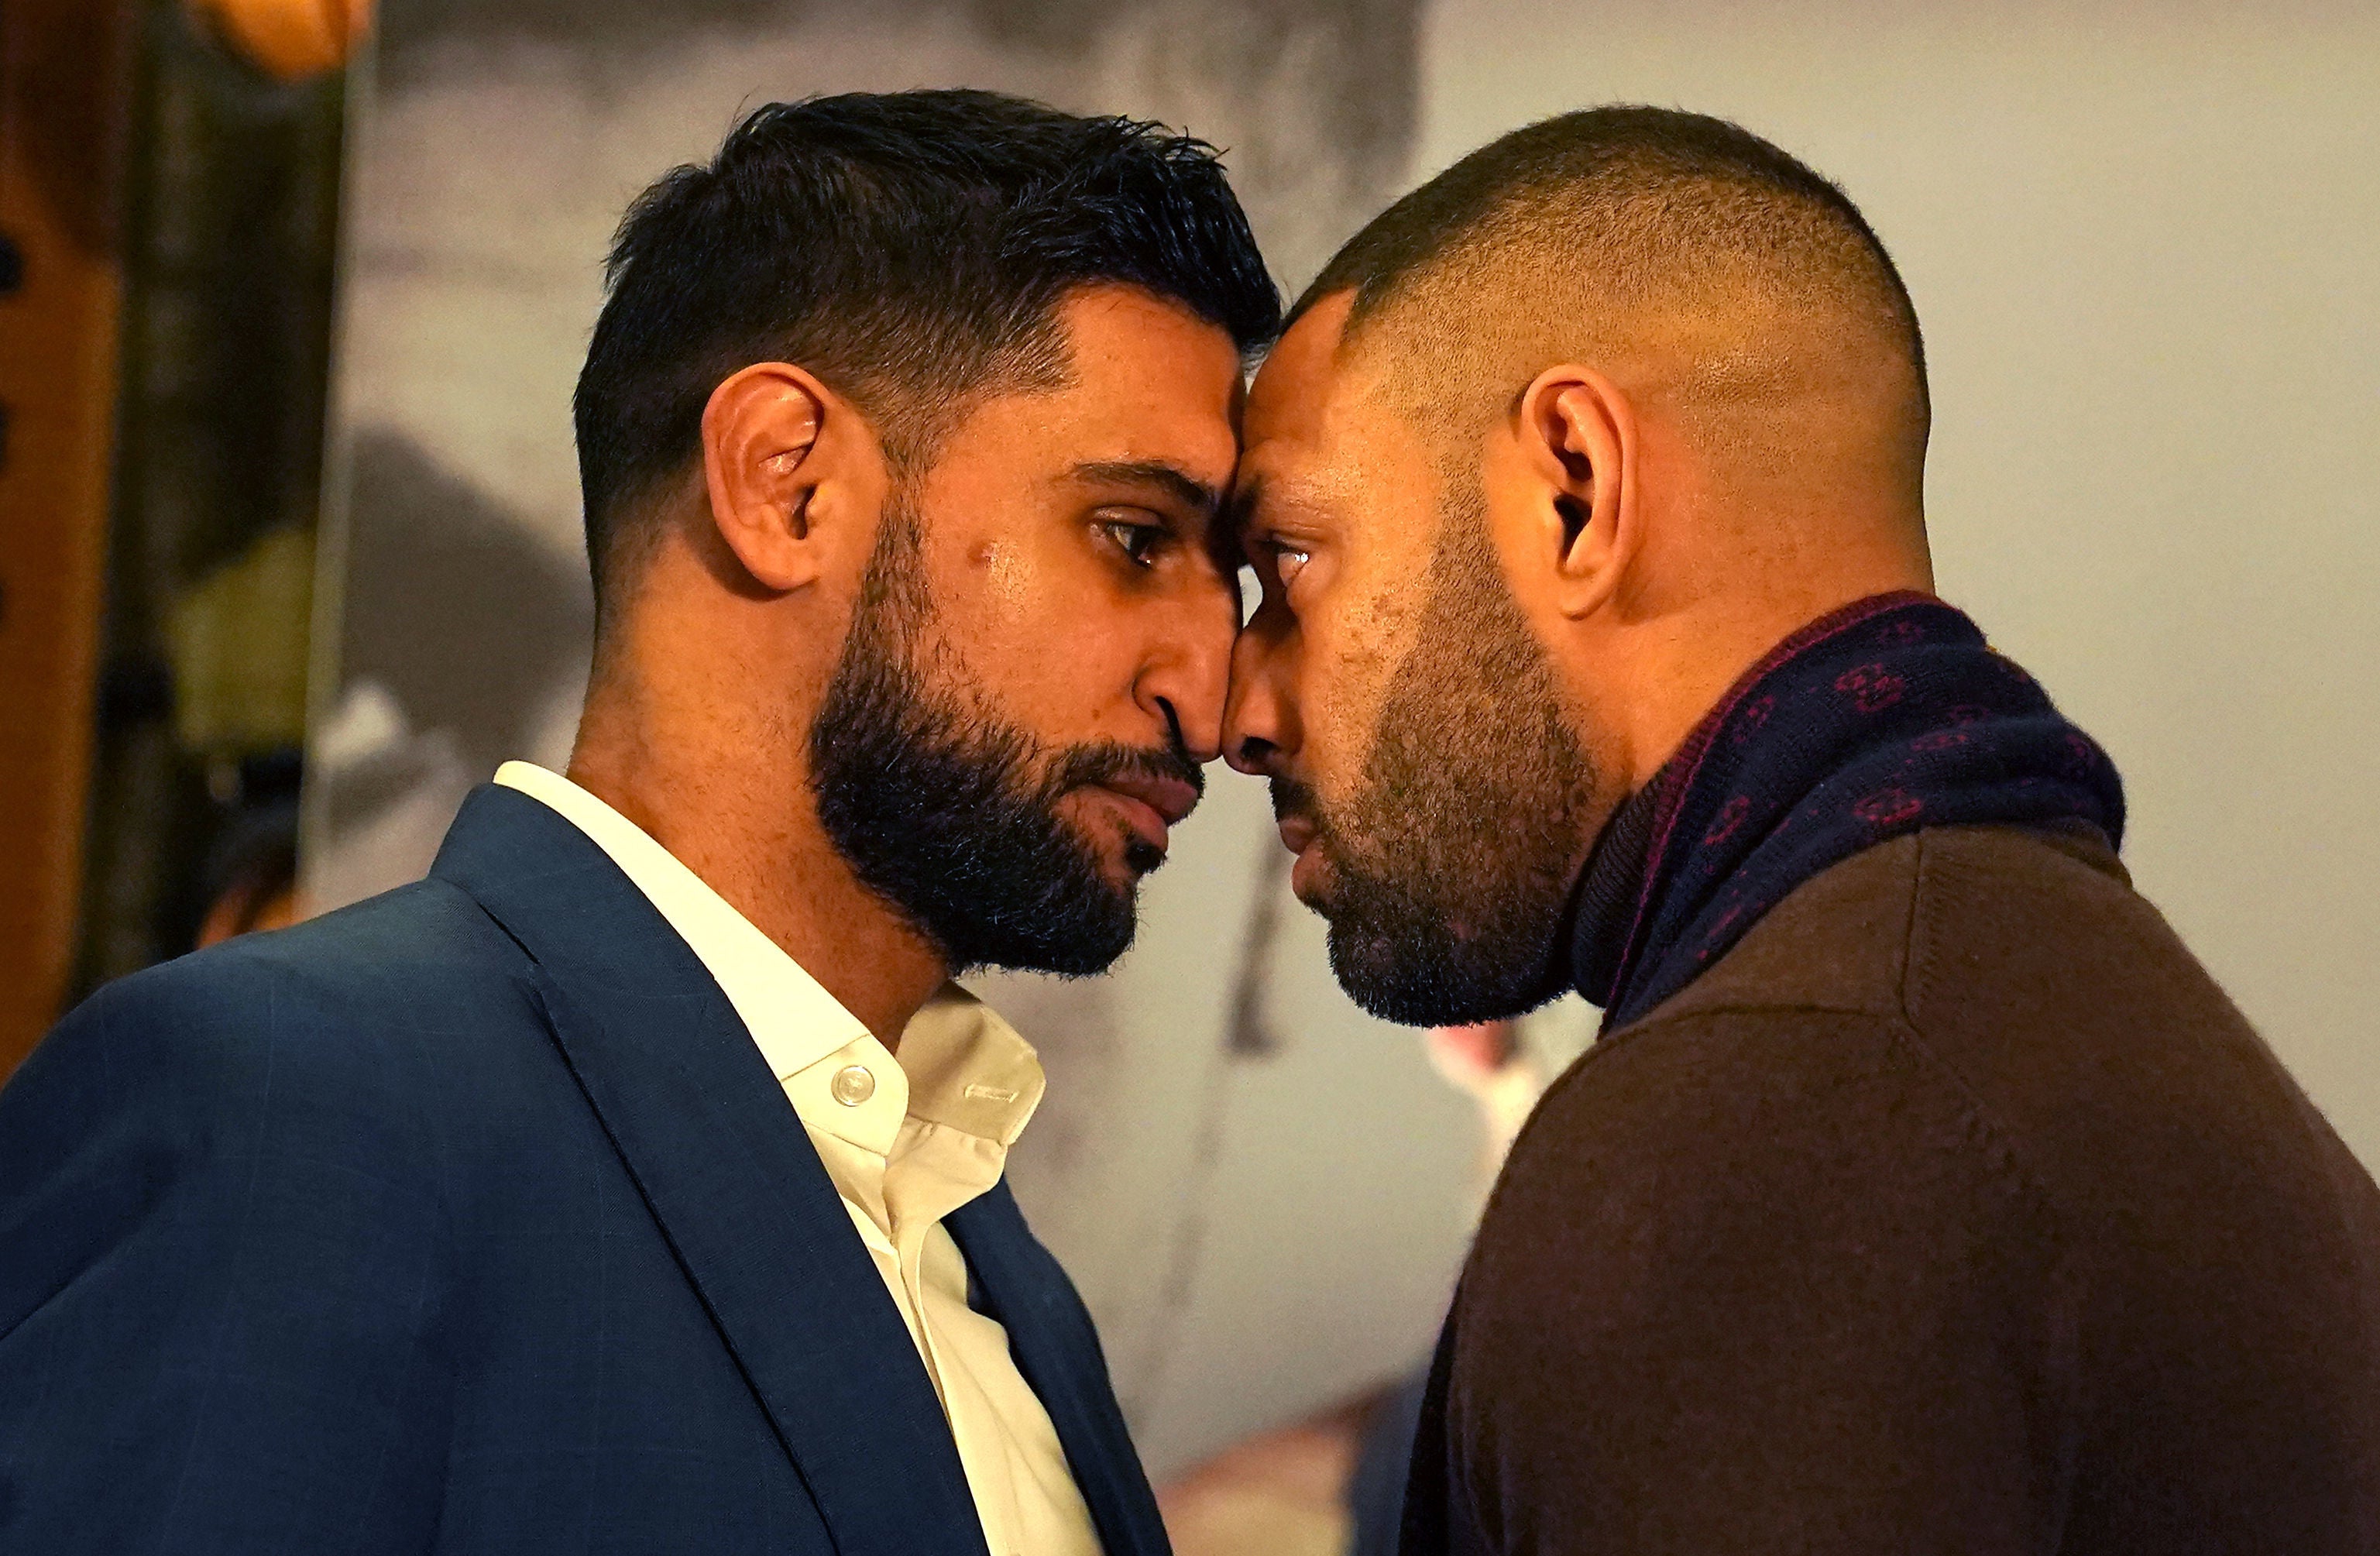 Amir Khan (left) and Kell Brook confront each other during a press conference